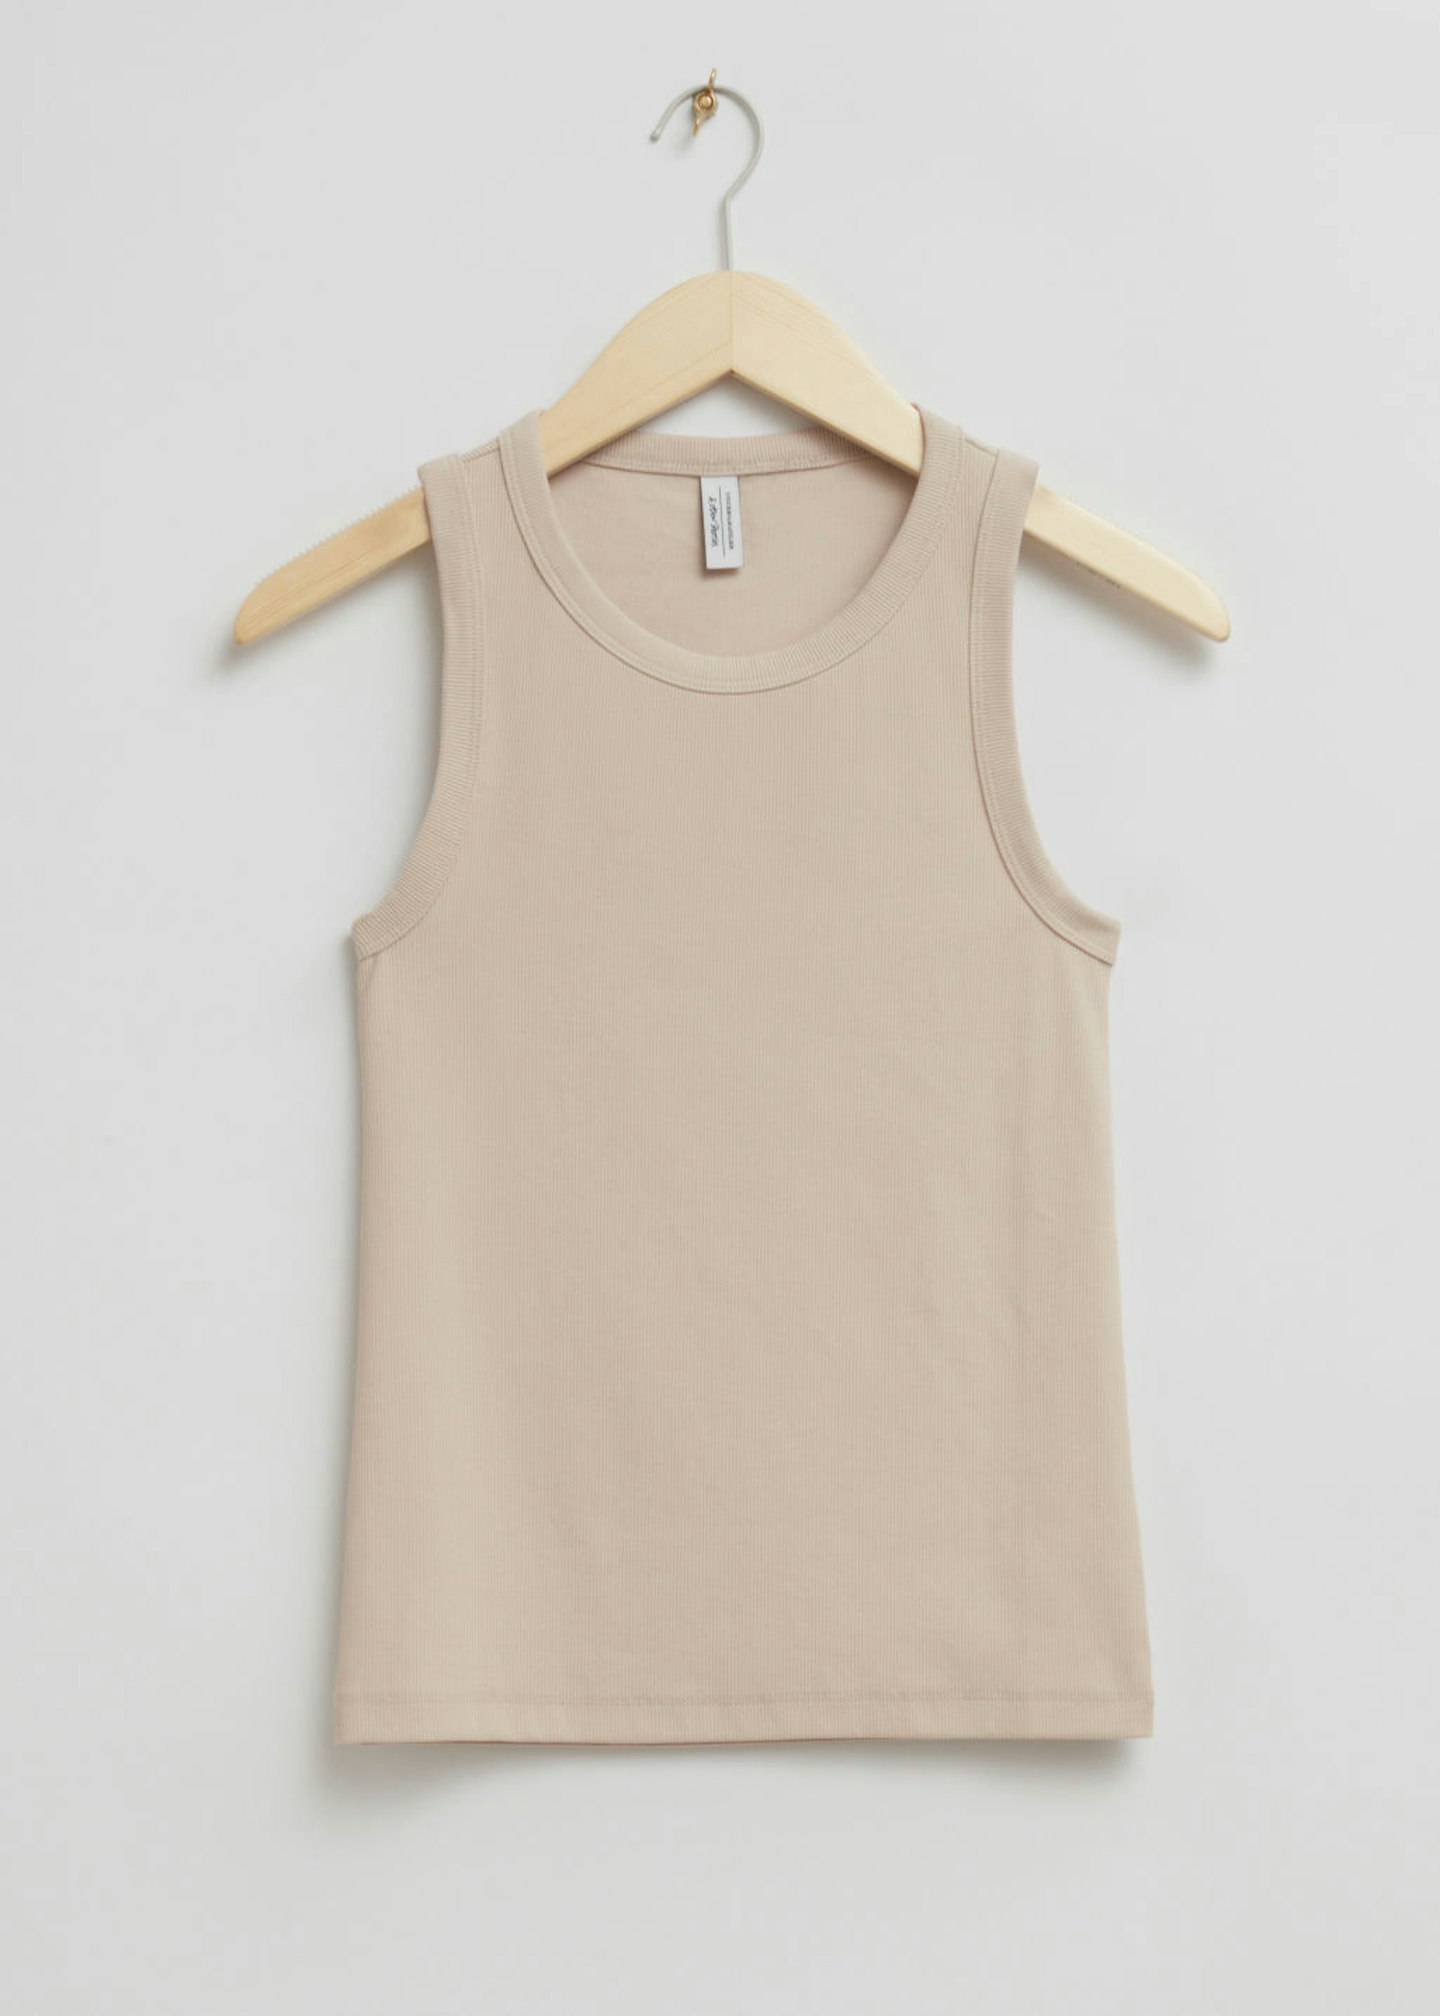 & Other Stories tank top